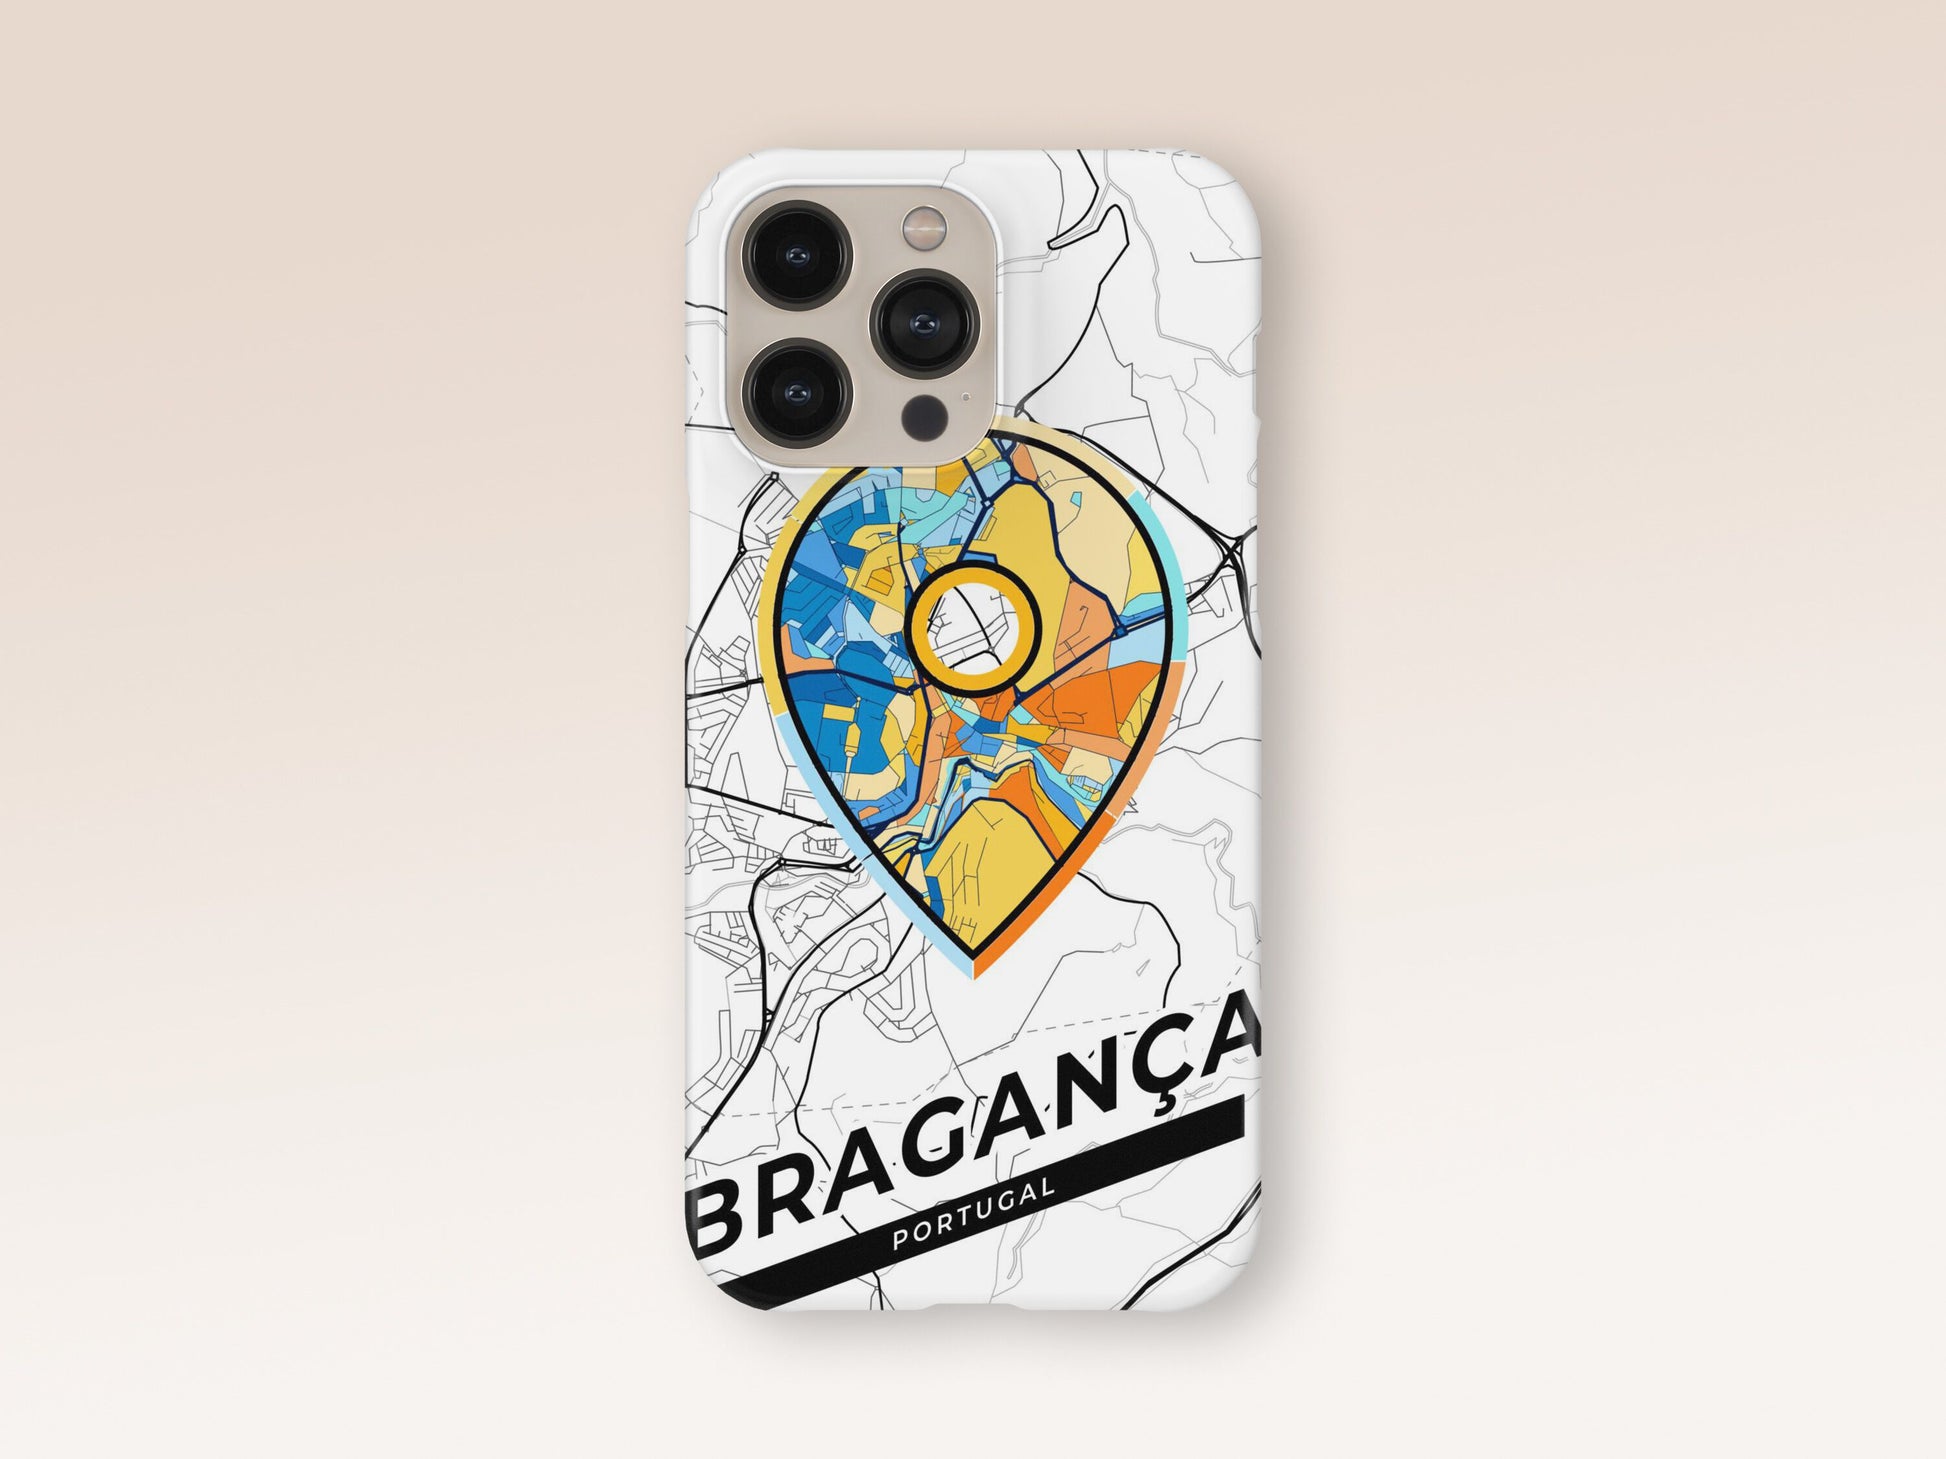 Bragança Portugal slim phone case with colorful icon. Birthday, wedding or housewarming gift. Couple match cases. 1